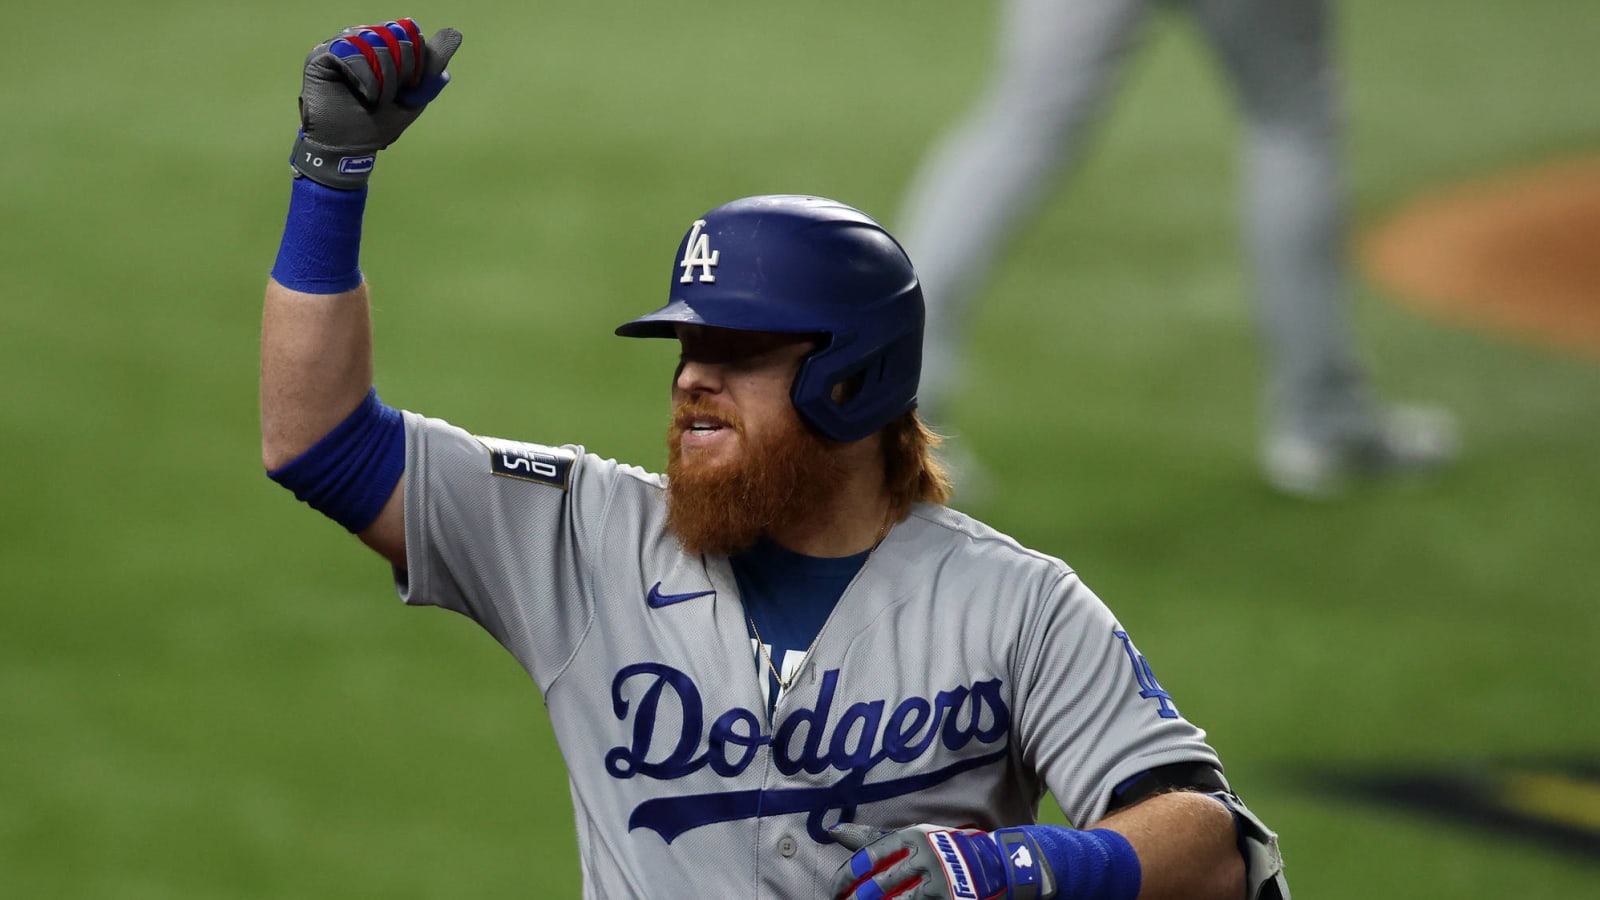 Justin Turner removed from Game 6 after positive COVID test